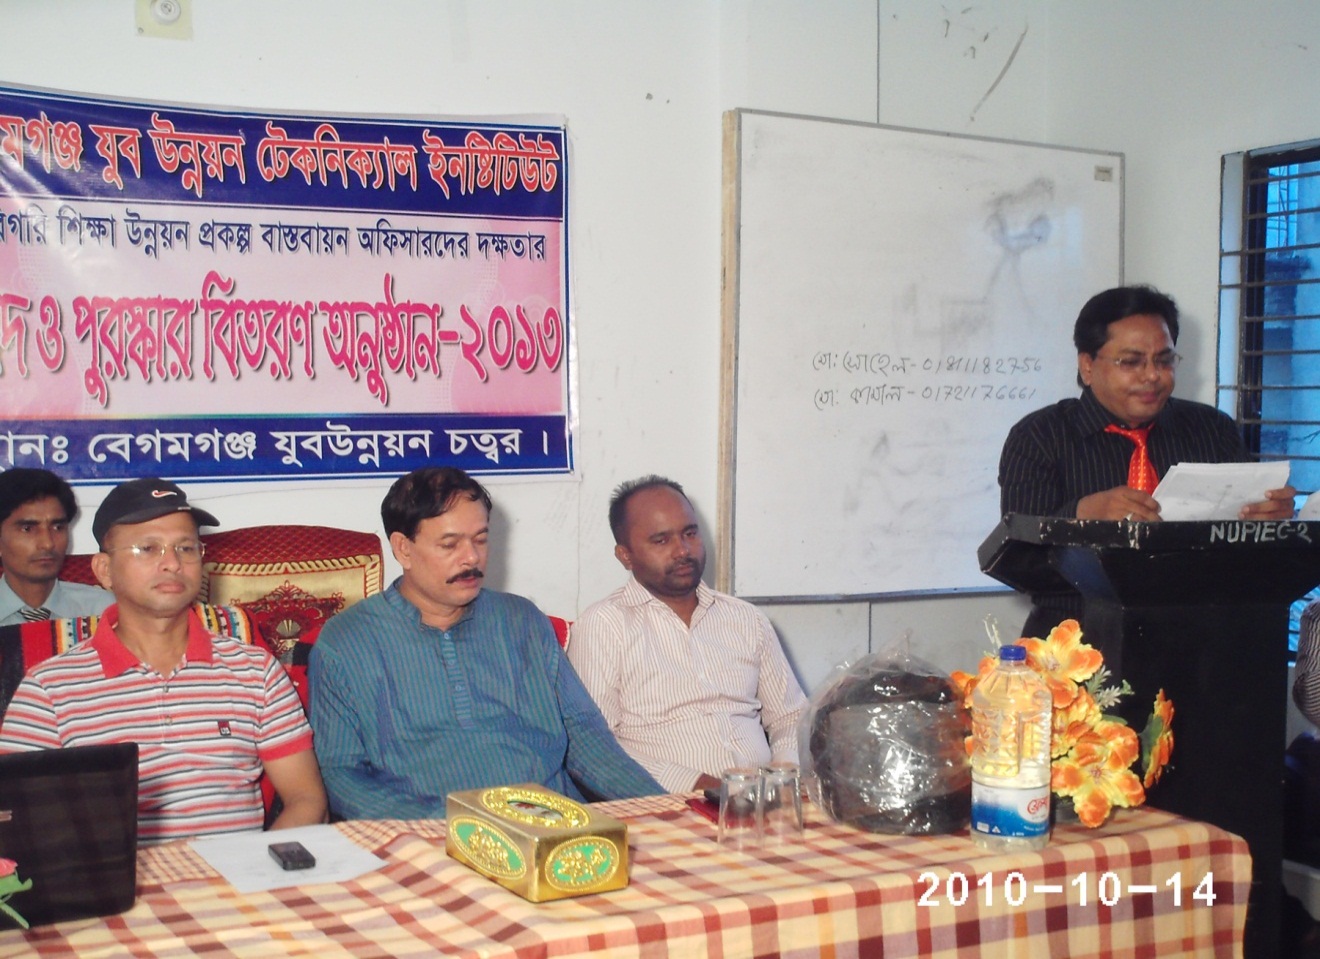 In the Pictrue- Chairman of Begamganj-Sonaimuri Shikkha O Sastha Unnayan Foundation and Begumganj Technical and Computer Institute Principal Gias Uddin Mithu Speaking at a ceremony to distribute certificates and awards to officers on technical education development project, Upazila Secondary Education Officer Mostafa Hossain and Best Chairman Durgapur UP Chairman MA Jalil are seen.